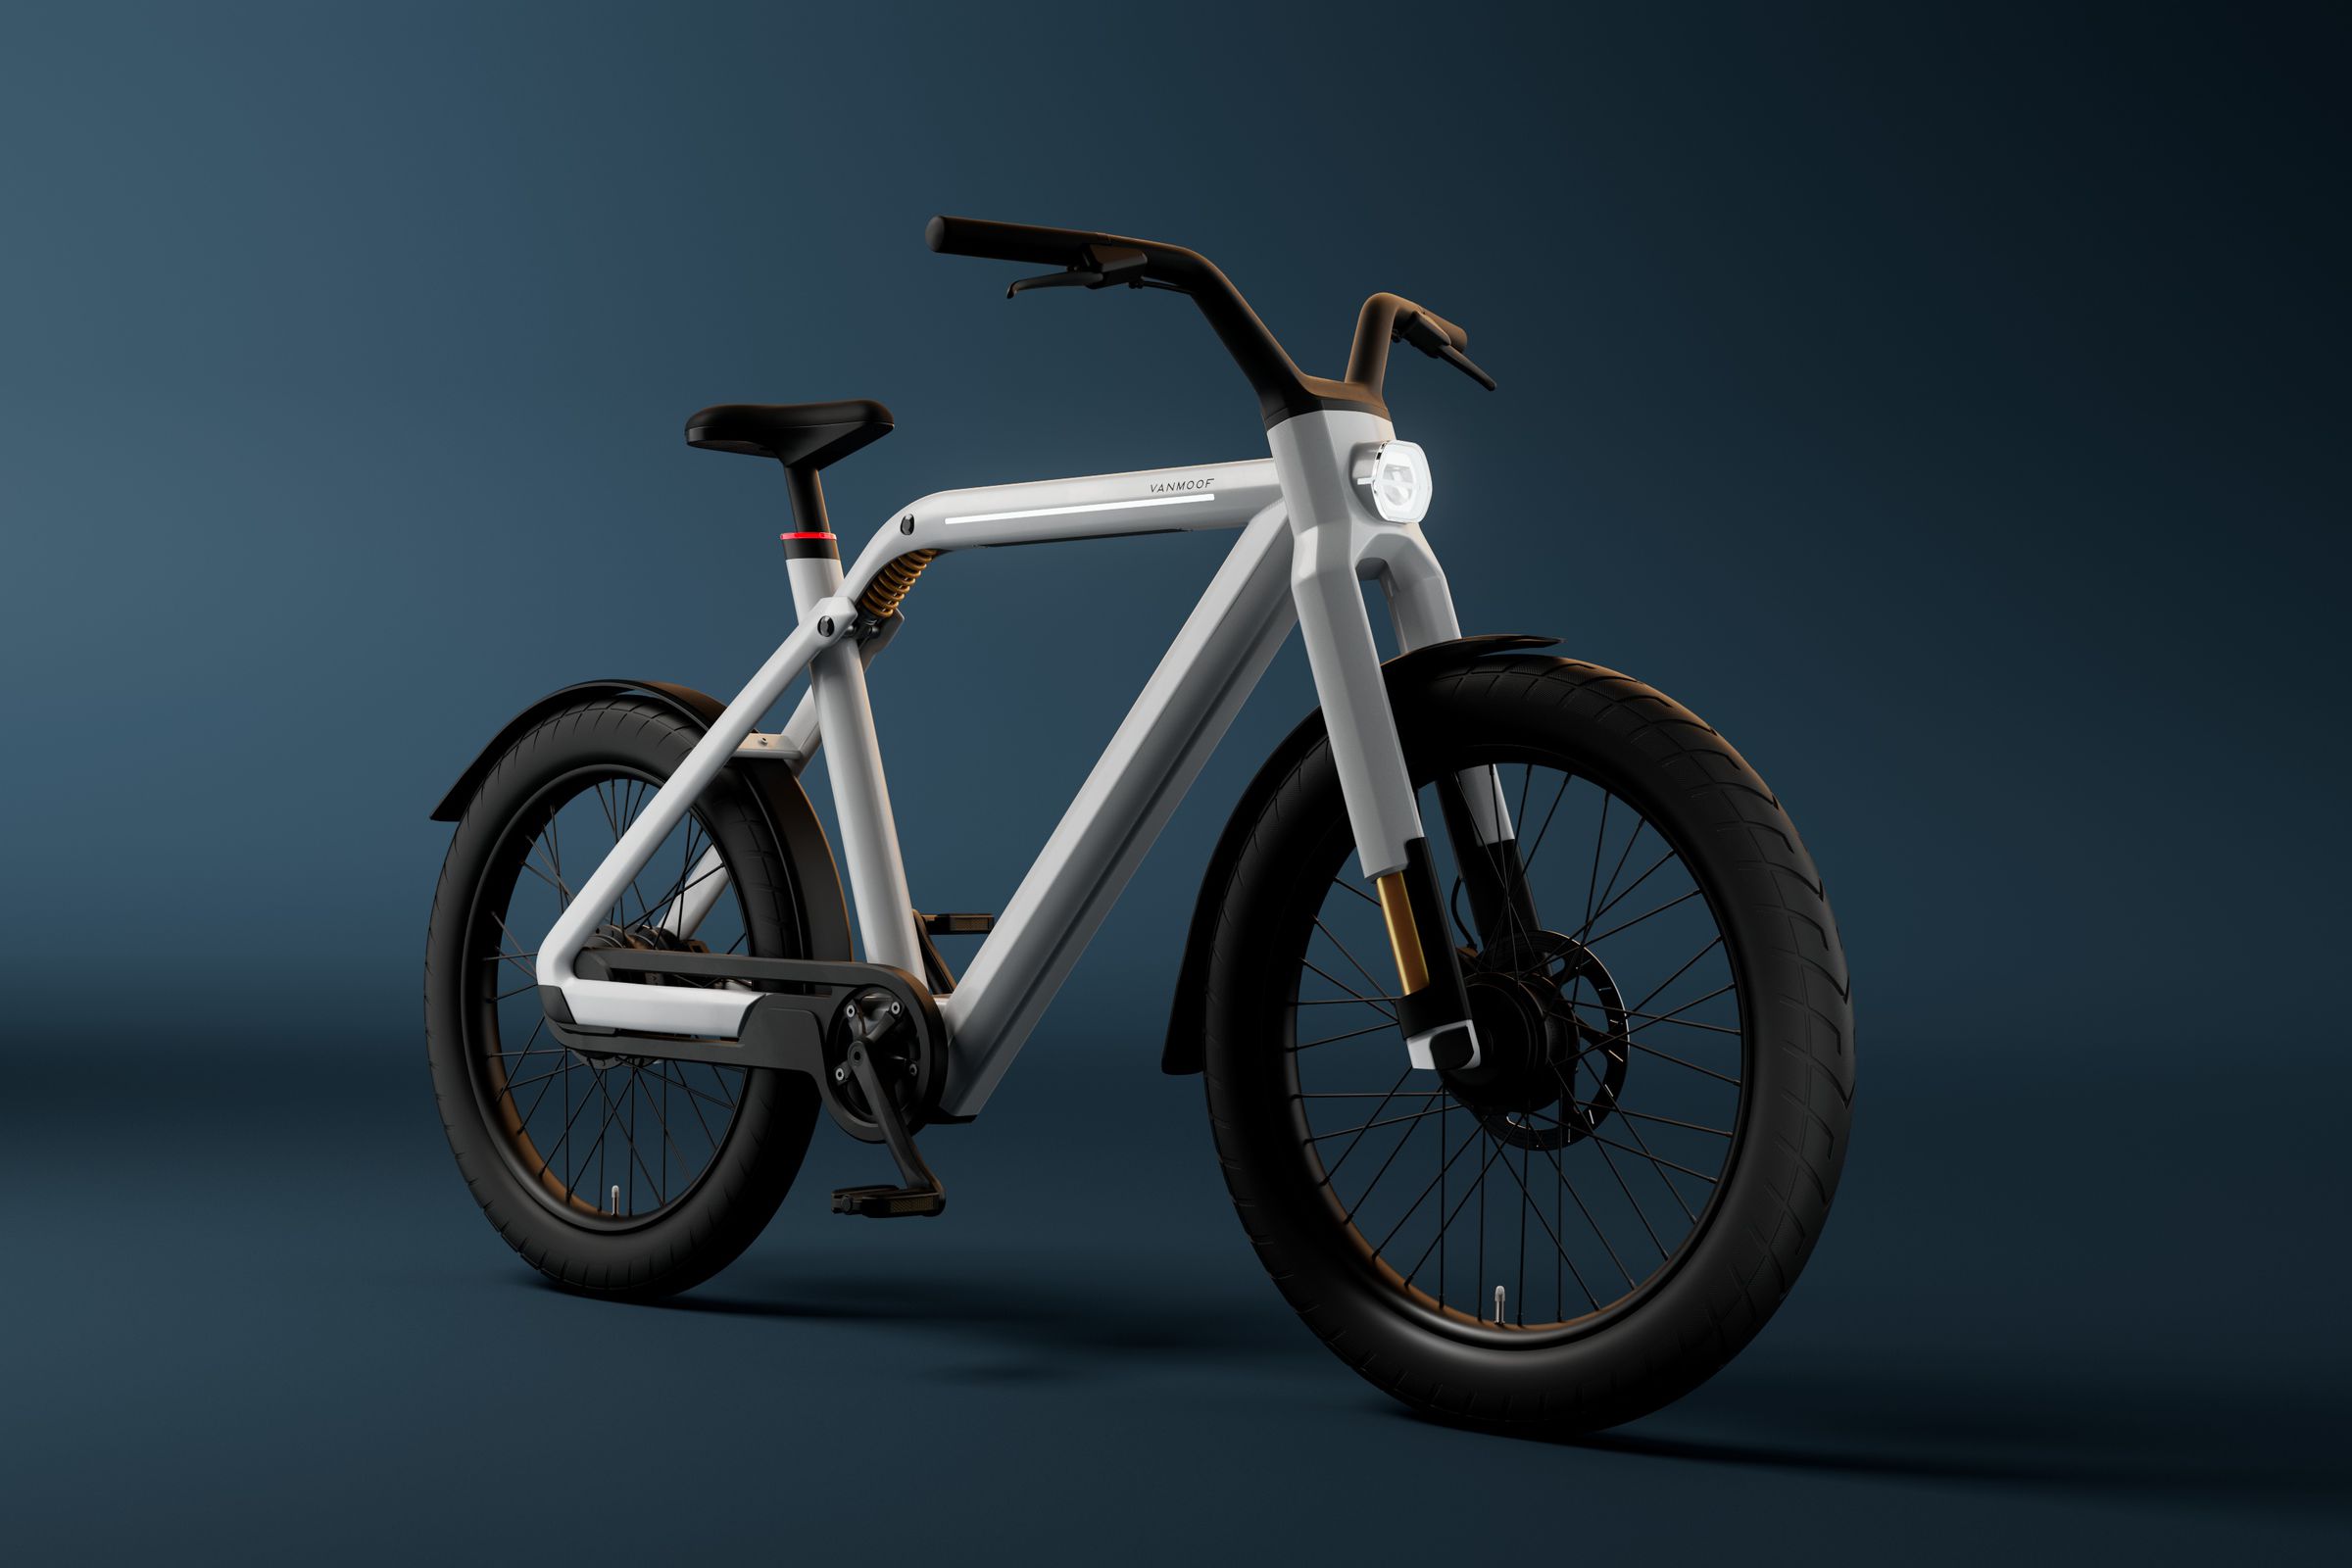 Rendering of the VanMoof V, the company’s first fast e-bike.